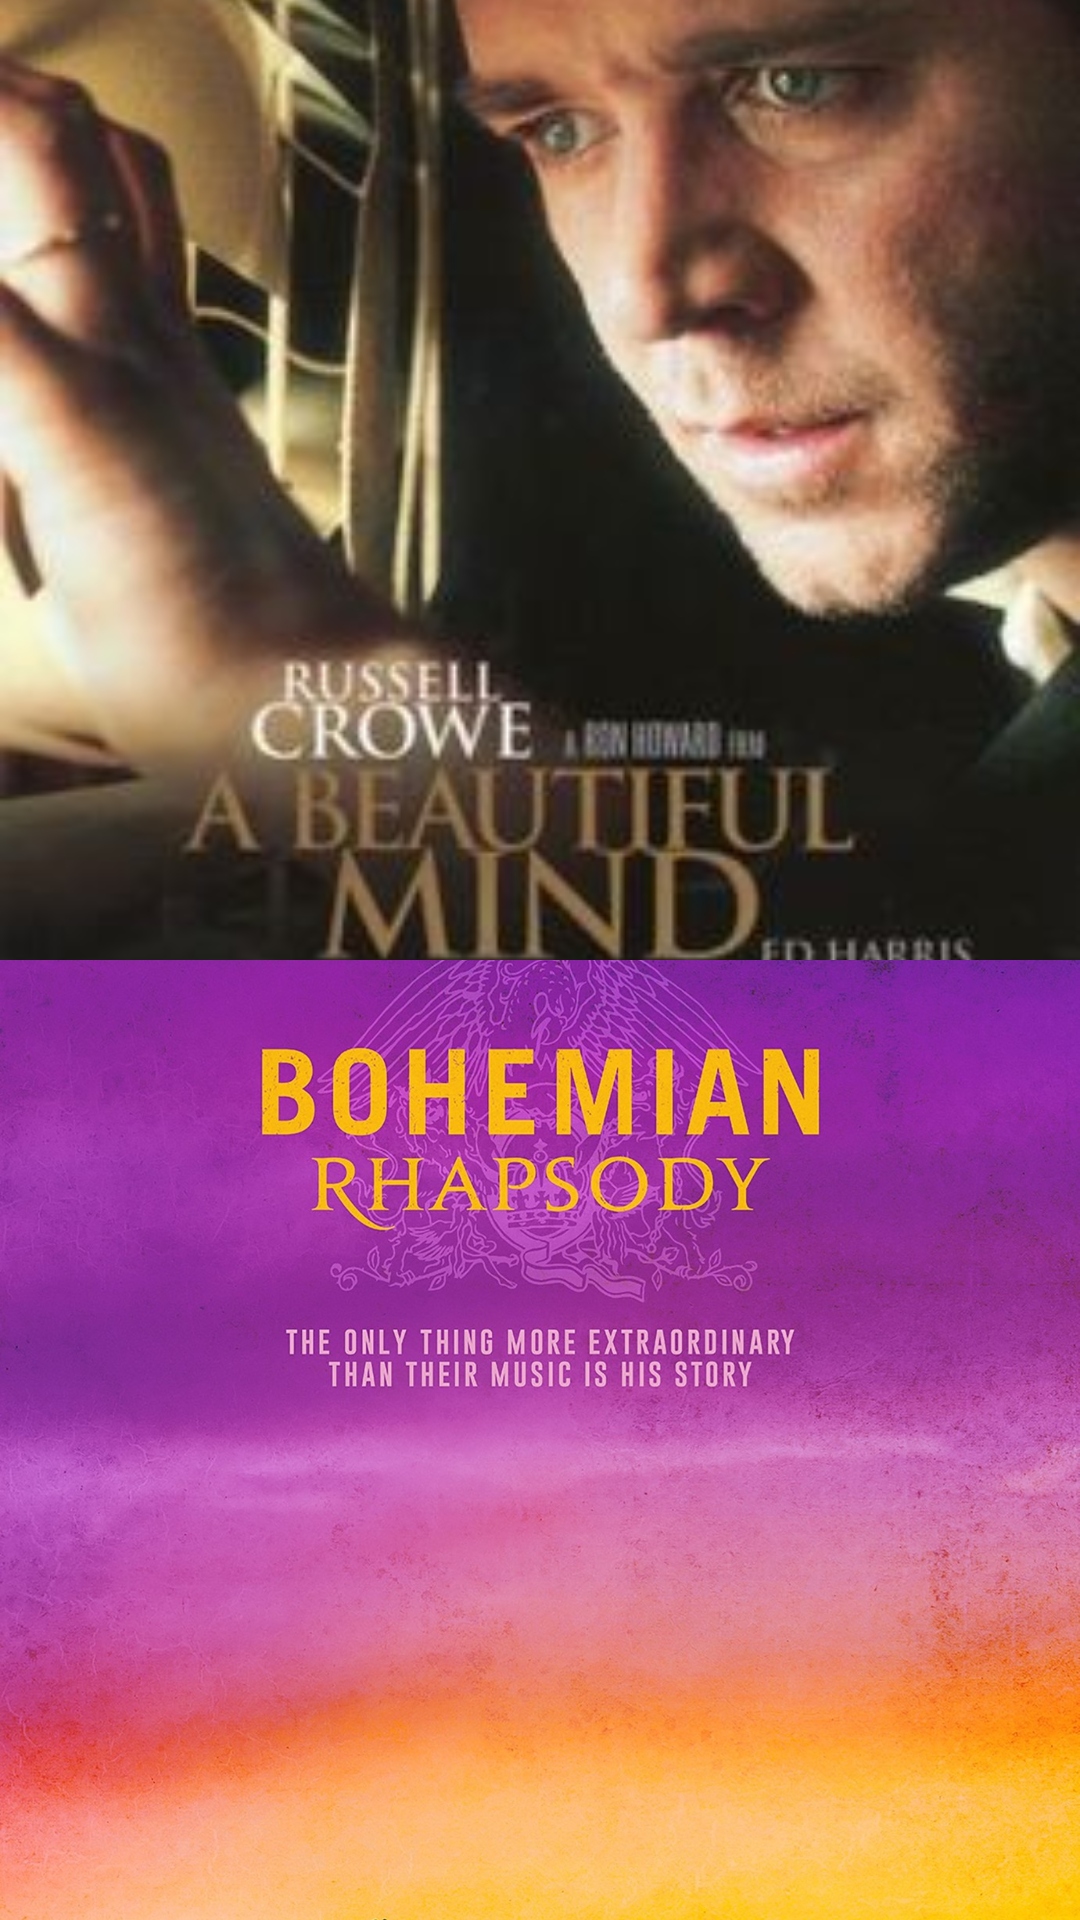 A Beautiful Mind to Bohemian Rhapsody: Hollywood Biopics that should be on every cinephile's list